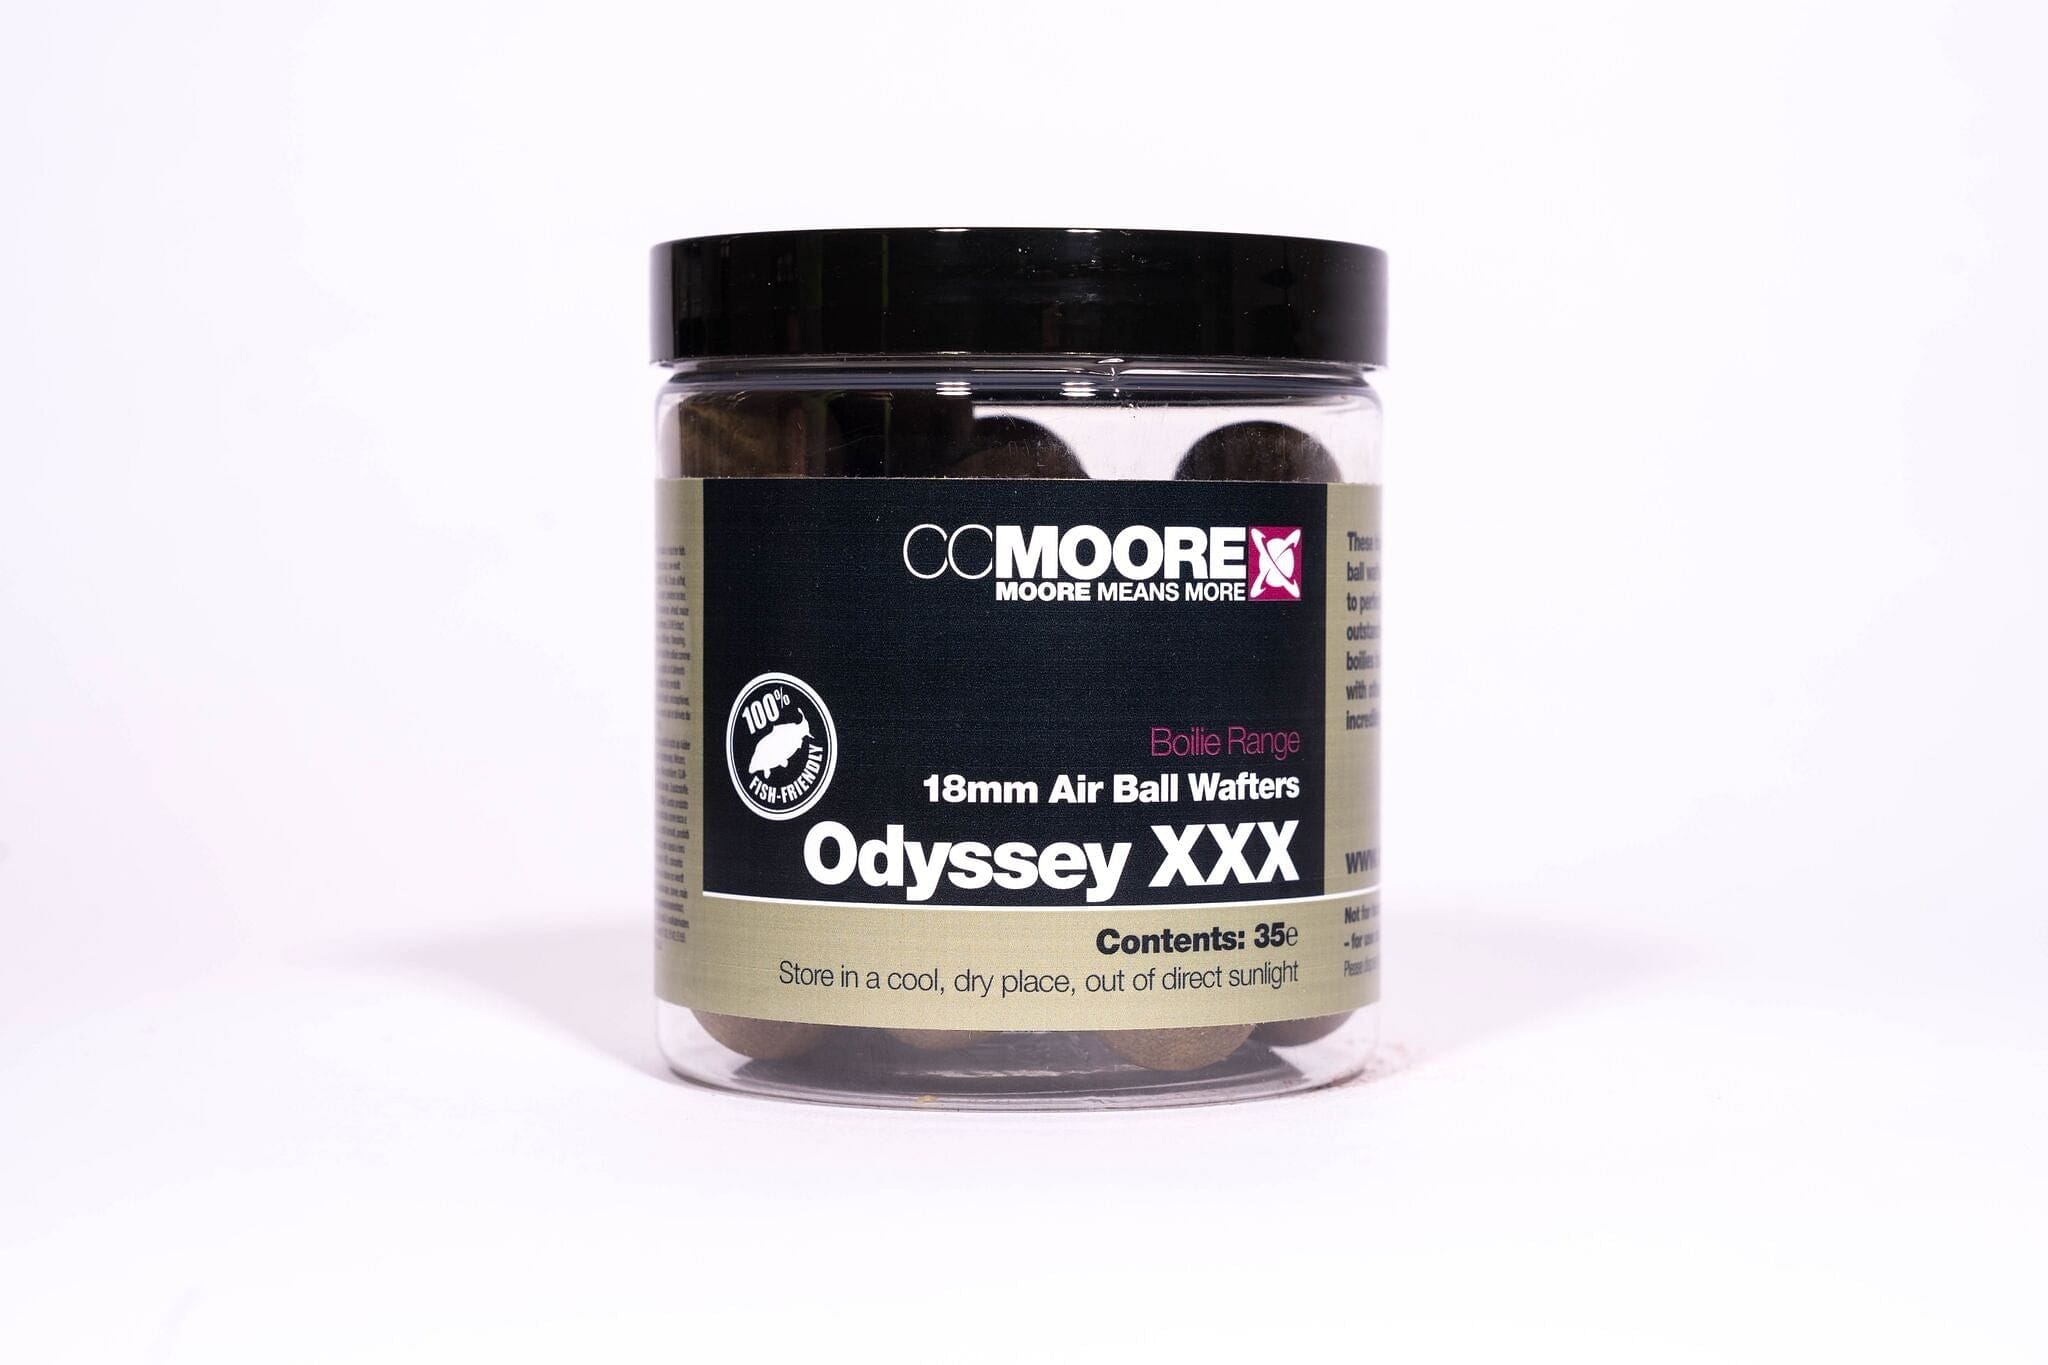 CC Moore Odyssey XXX Air Ball Wafters 18mm